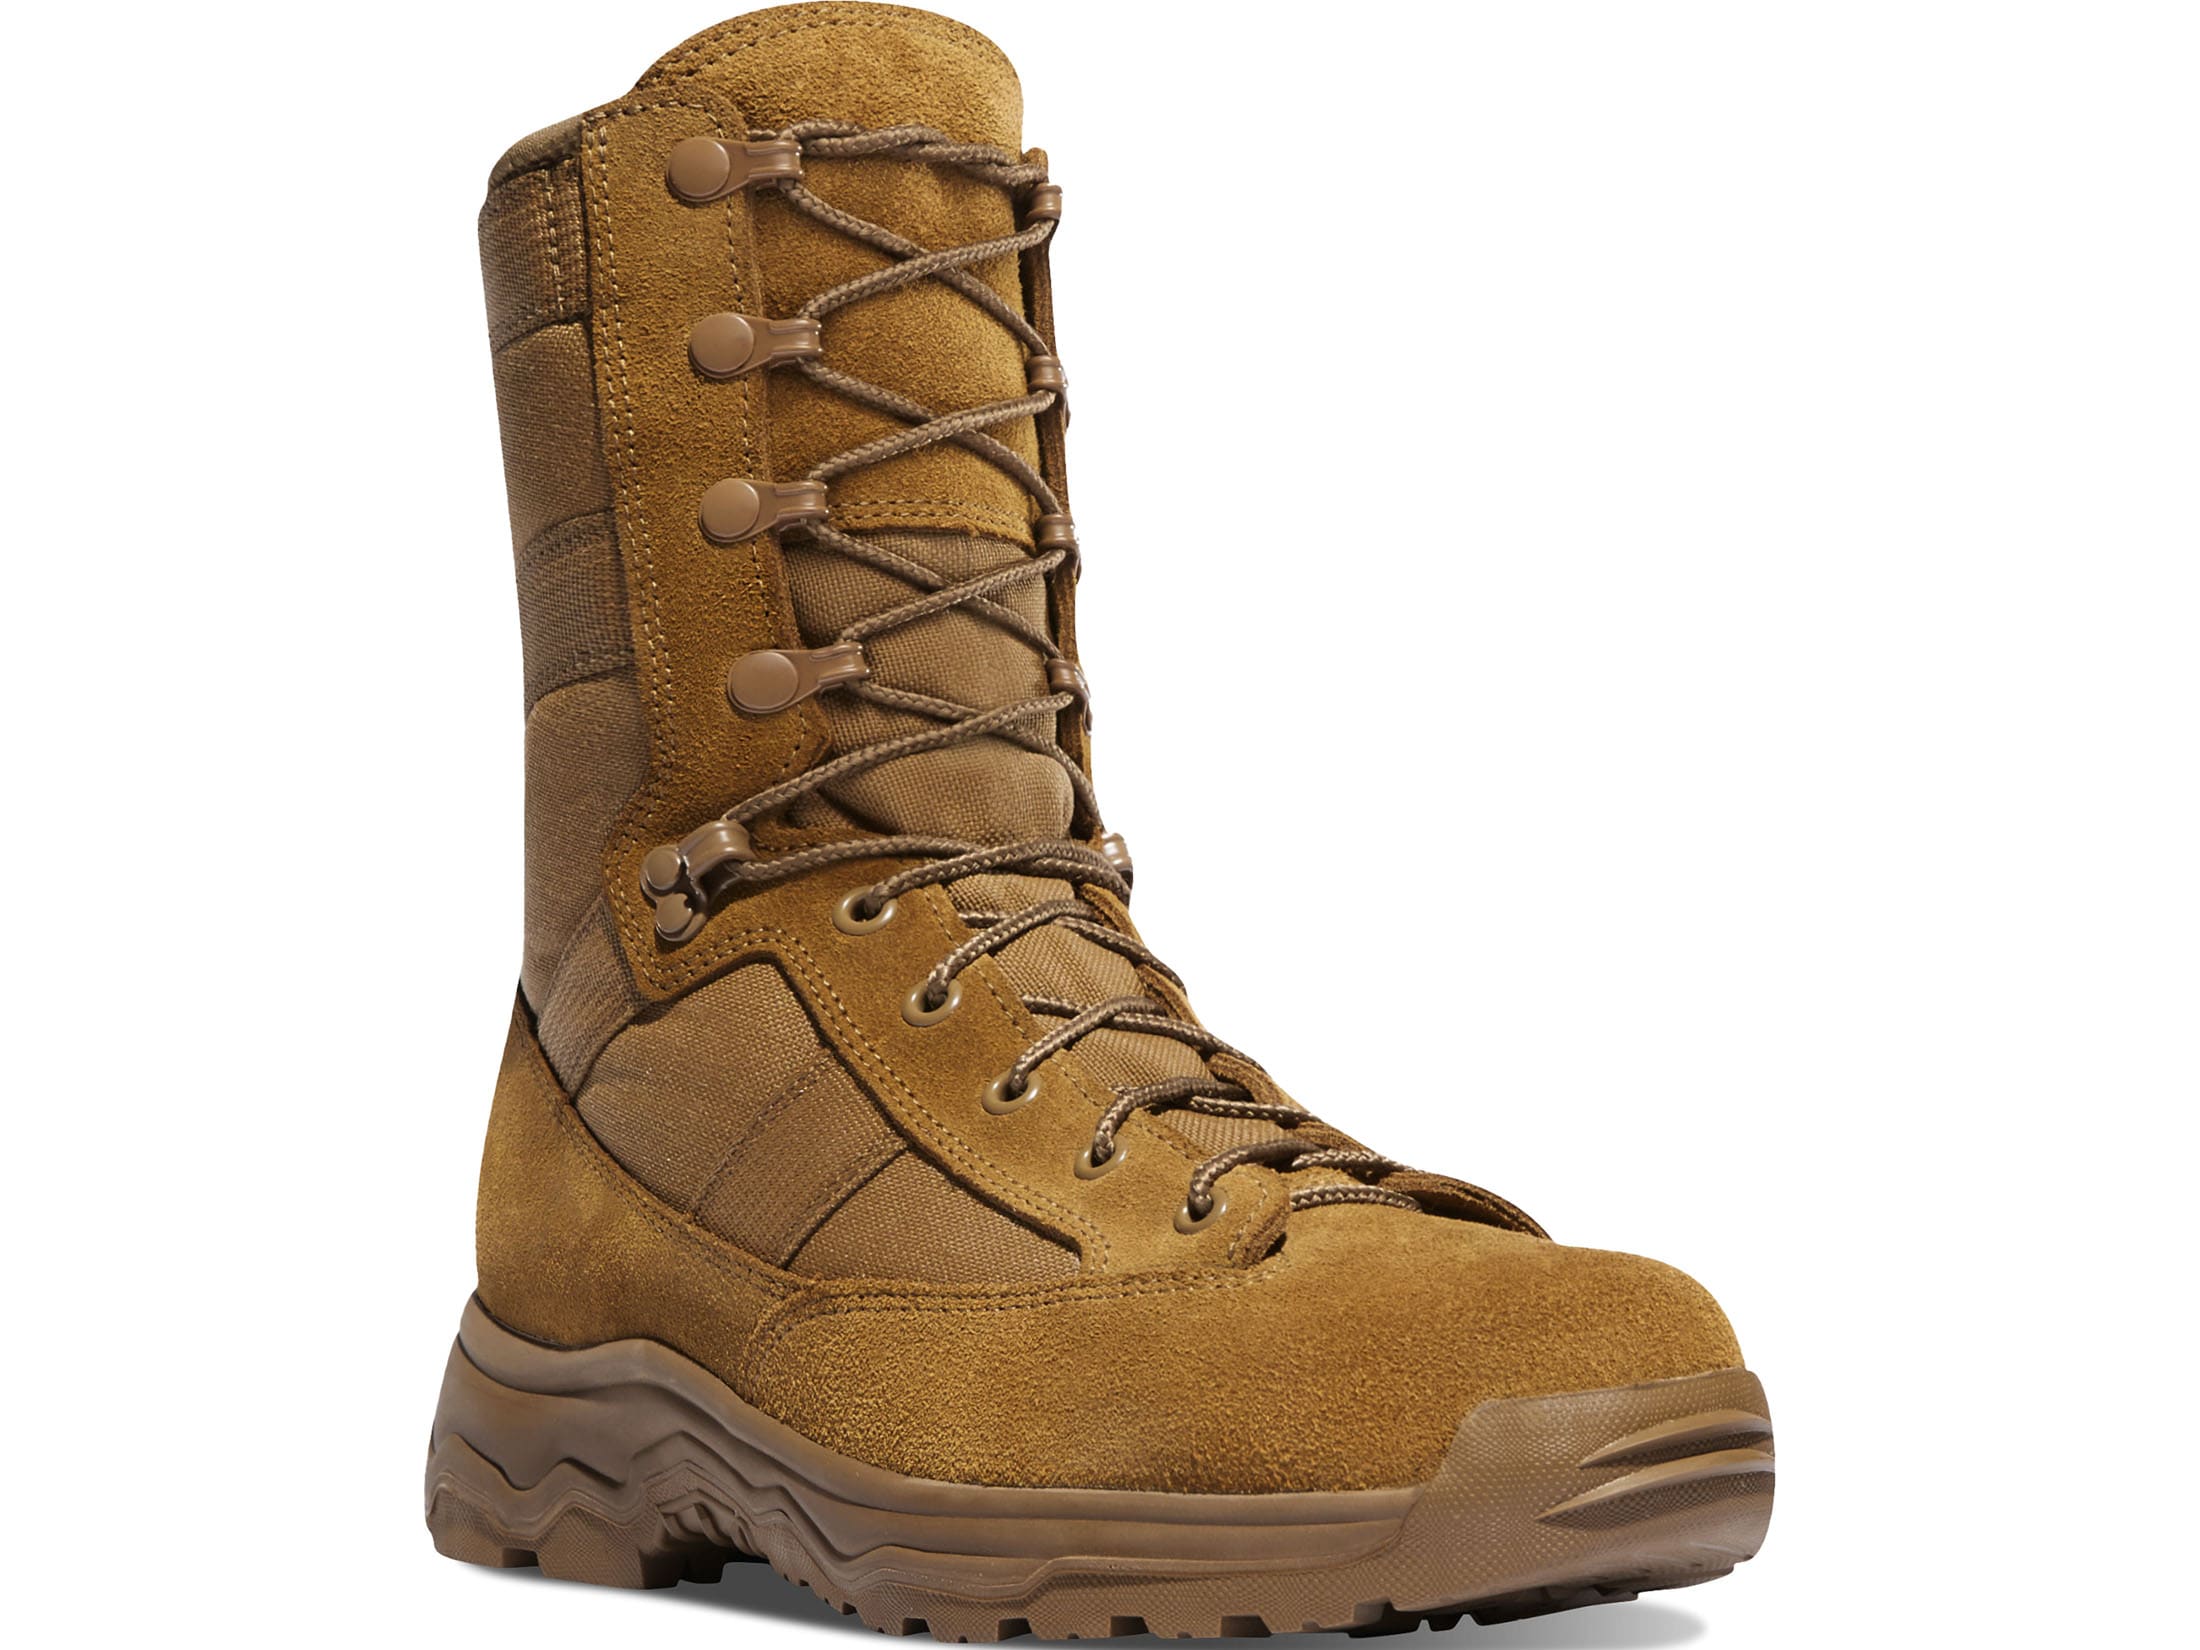 Danner Reckoning 8 400 Gram Insulated Tactical Boots Leather Coyote